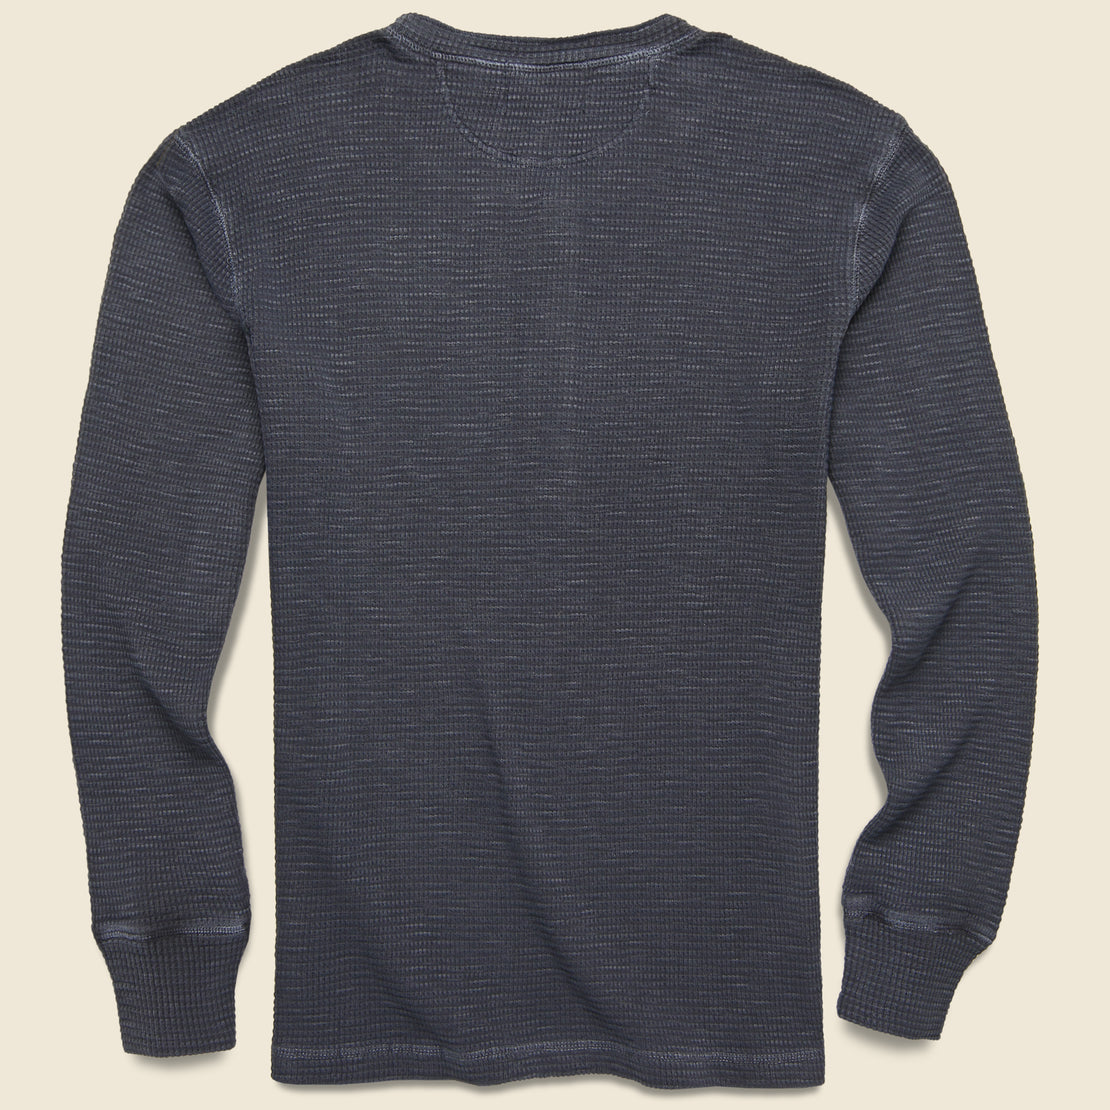 Waffle Henley SS Tshirt in Anthracite - Usolo Outfitters